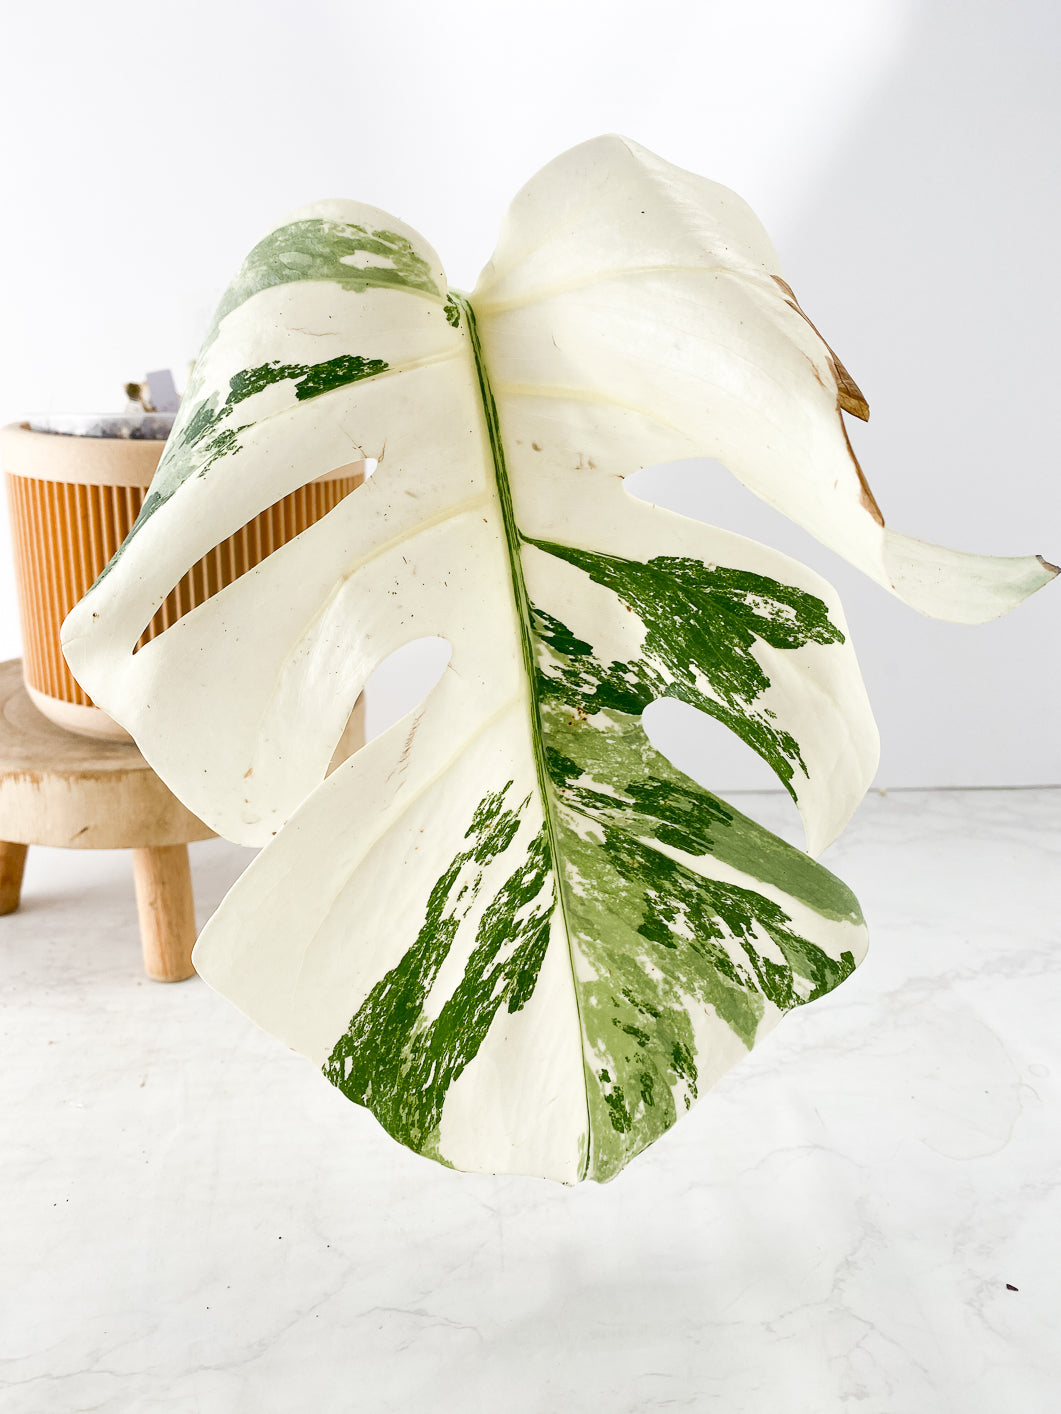 Monstera Albo White Tiger 1 leaf 1 sprout Rooting